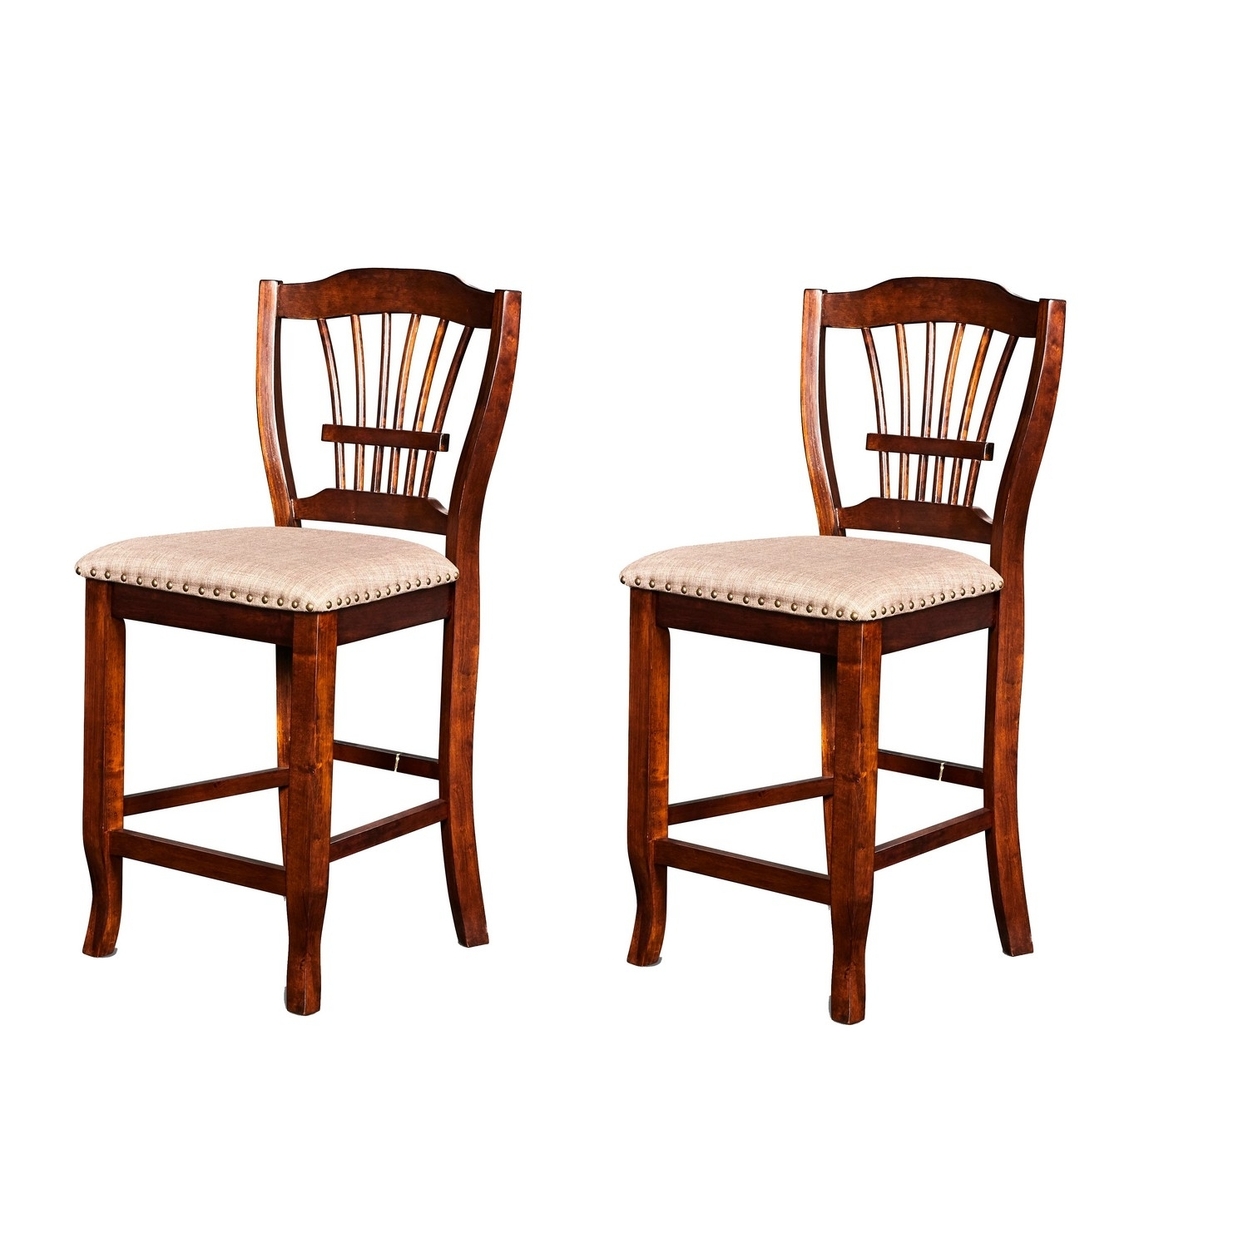 Slatted Back Wooden Counter Chair With Nailhead Trim, Set Of 2, Brown- Saltoro Sherpi